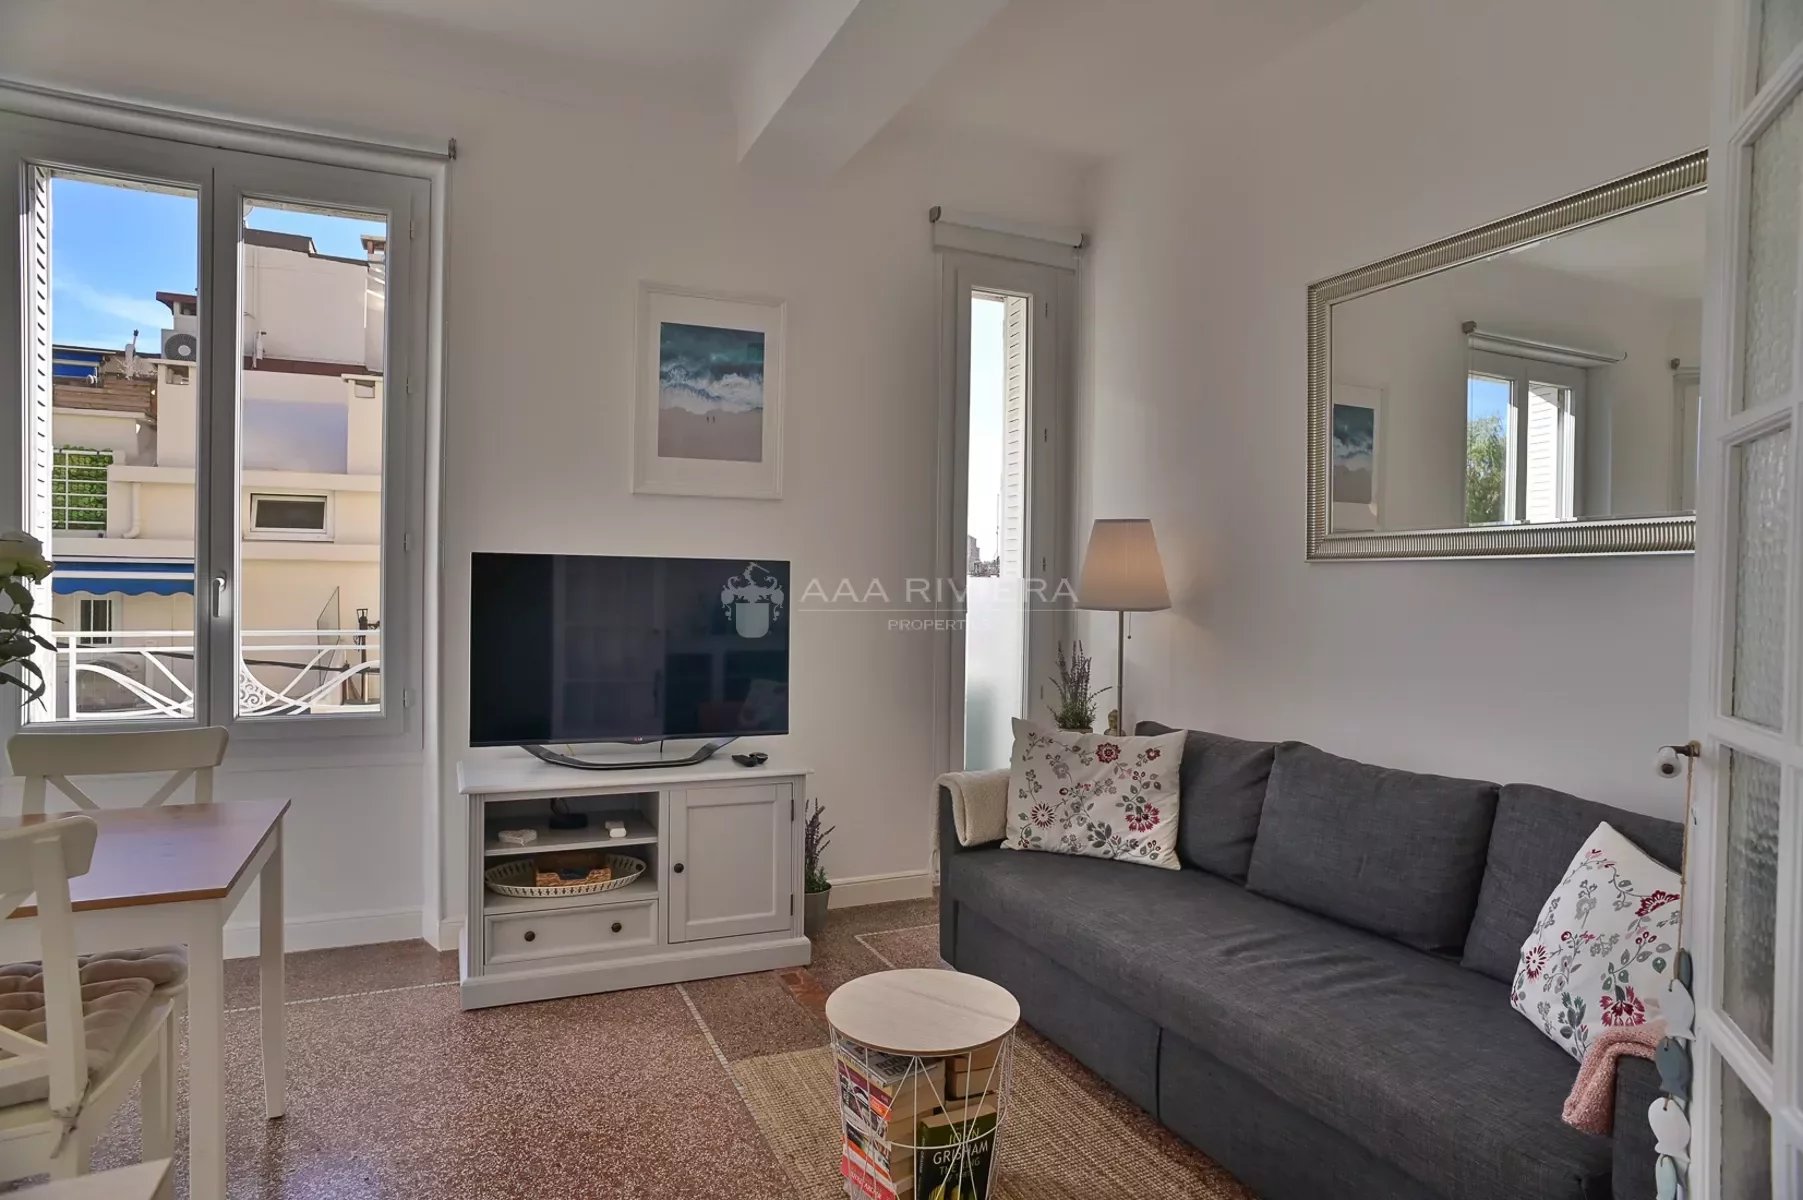 SOLE AGENT -  CANNES - Beautiful newly refurbished 2 bedroomed apartement ideally located a 5 min. walk from the centre